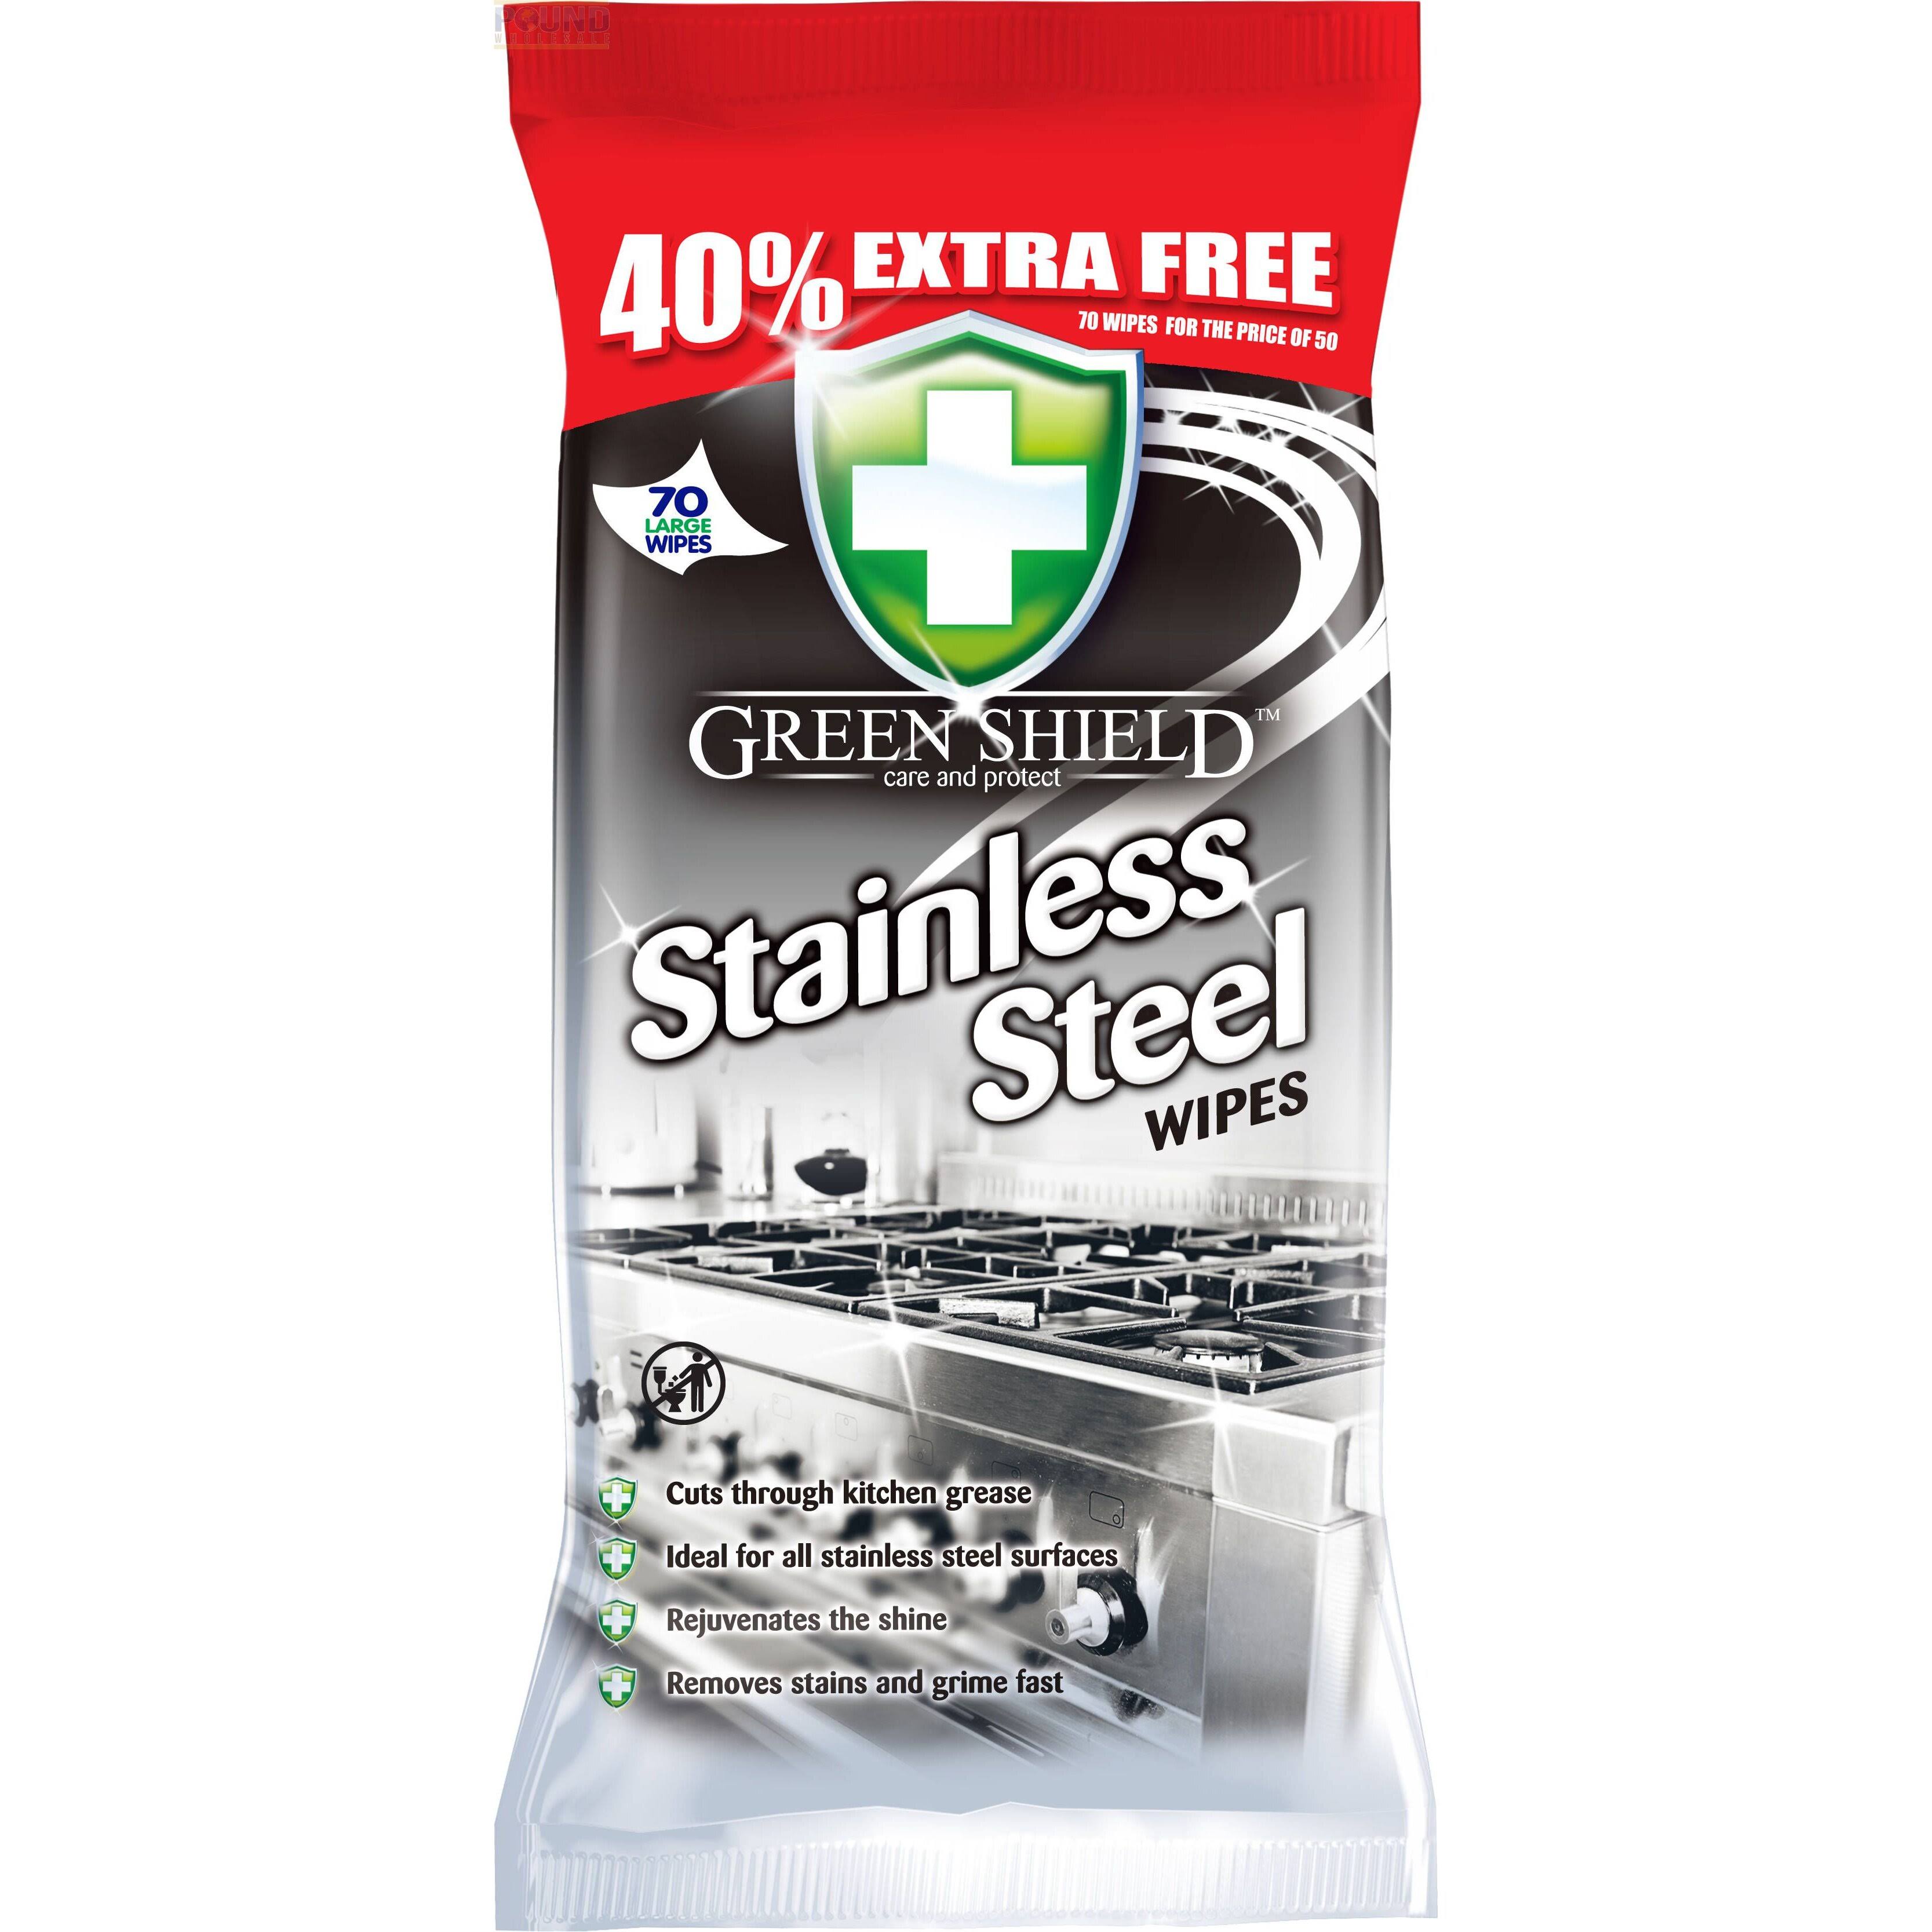 Green Shield Stainless Steel Wipes 70 Pack